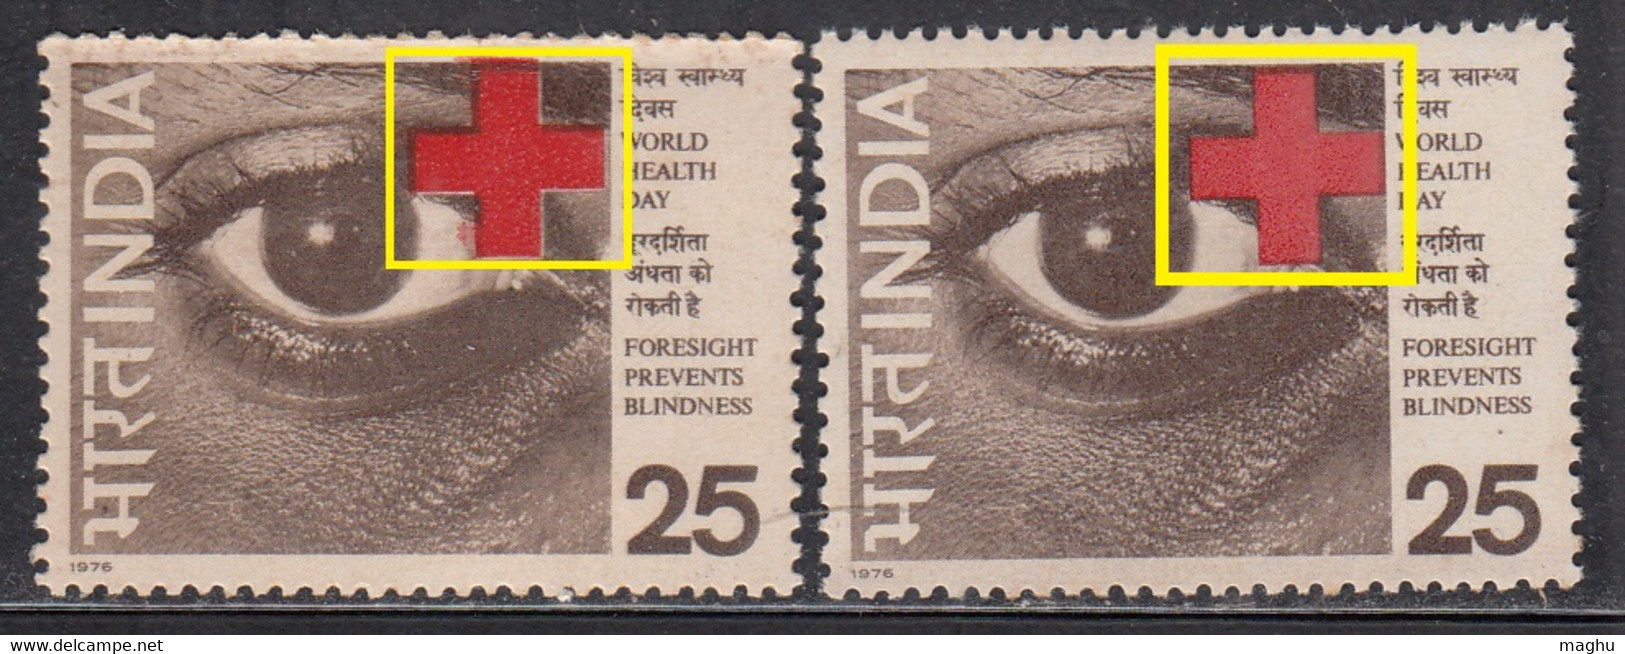 EFO, Colour Shift Variety, India MNH 1976, World Health Day, Eye Organ, Prevent Blindness, Disease, Disabled - Errors, Freaks & Oddities (EFO)